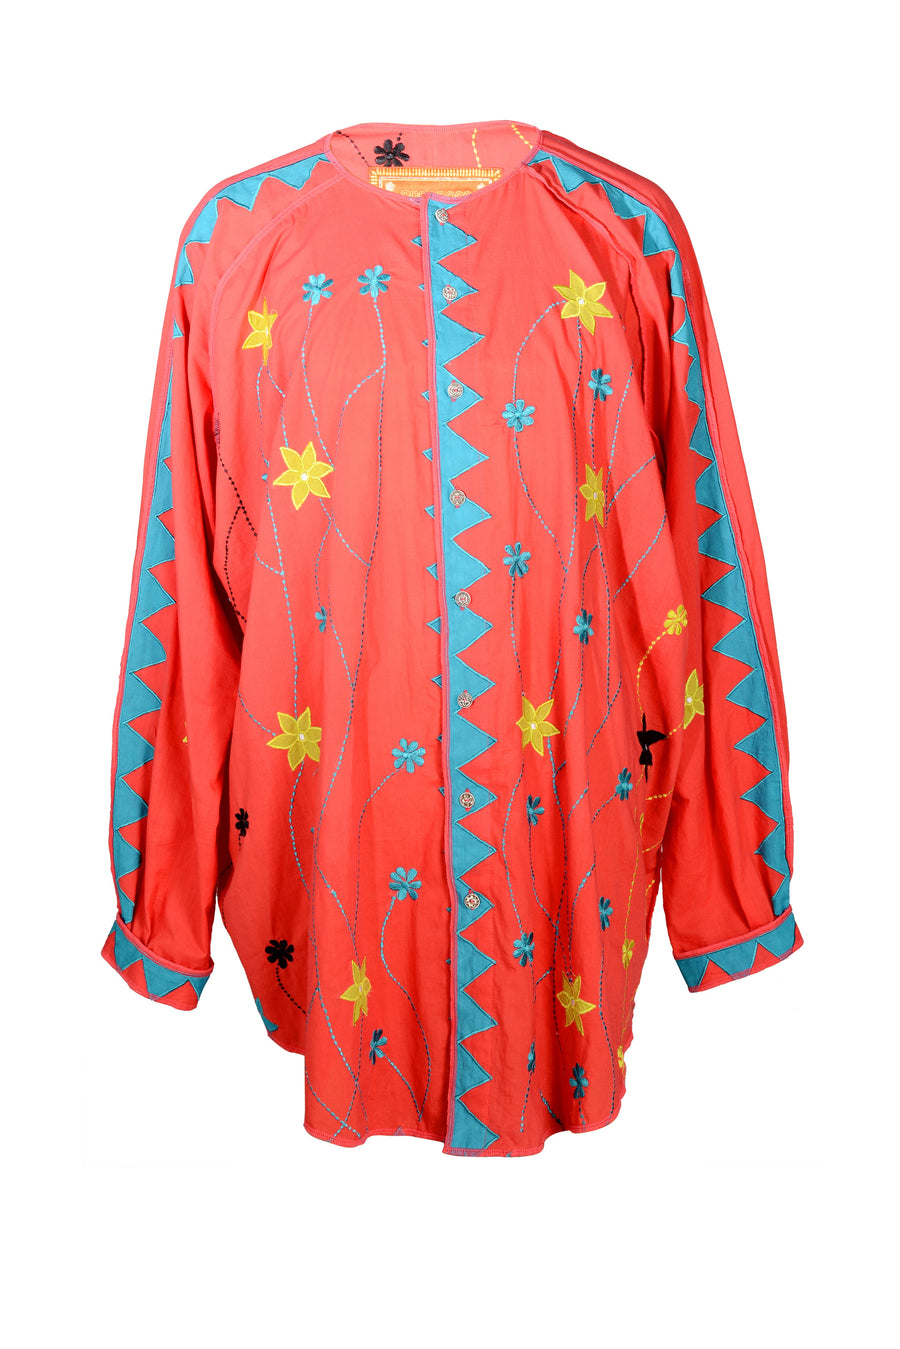 Lany - Cotton Voile Applique Long Sleeves Shirt (7342051033284) (7342386708676)